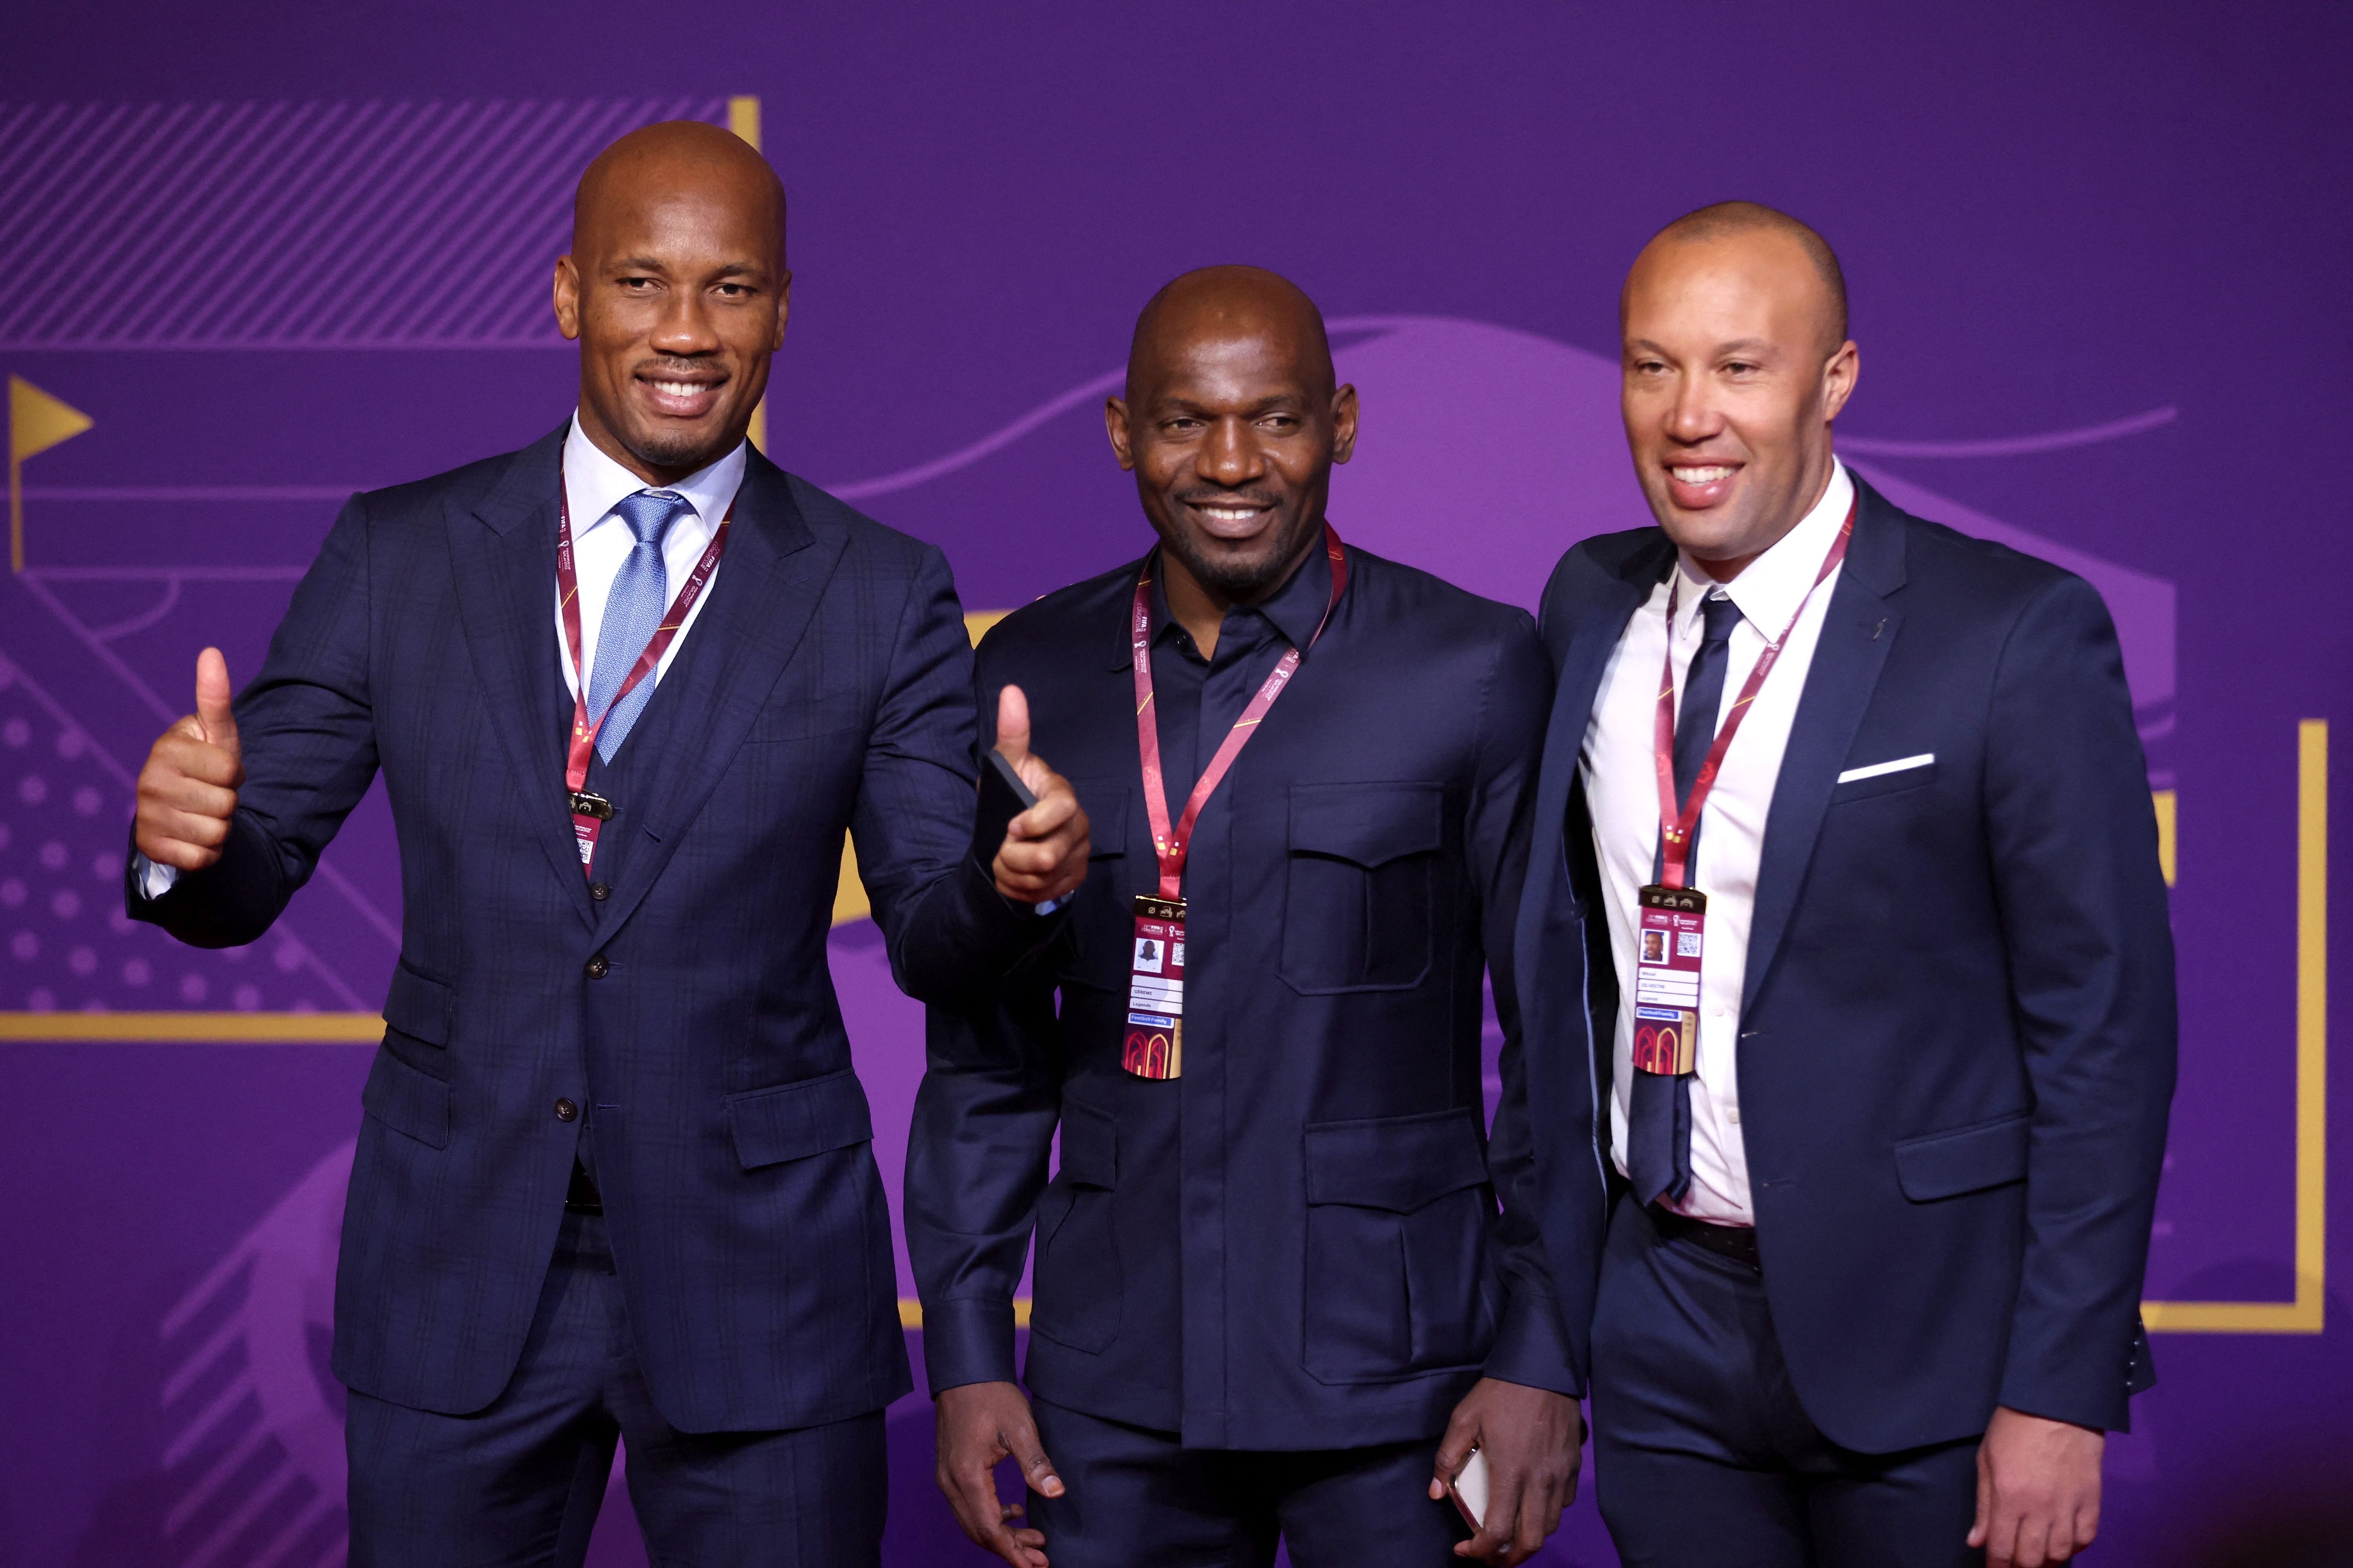 Soccer Football - World Cup - Final Draw - Doha Exhibition & Convention Center, Doha, Qatar - April 1, 2022 Former player Didier Drogba, Geremi and Mikael Silvestre arrive ahead of the draw REUTERS/Carl Recine